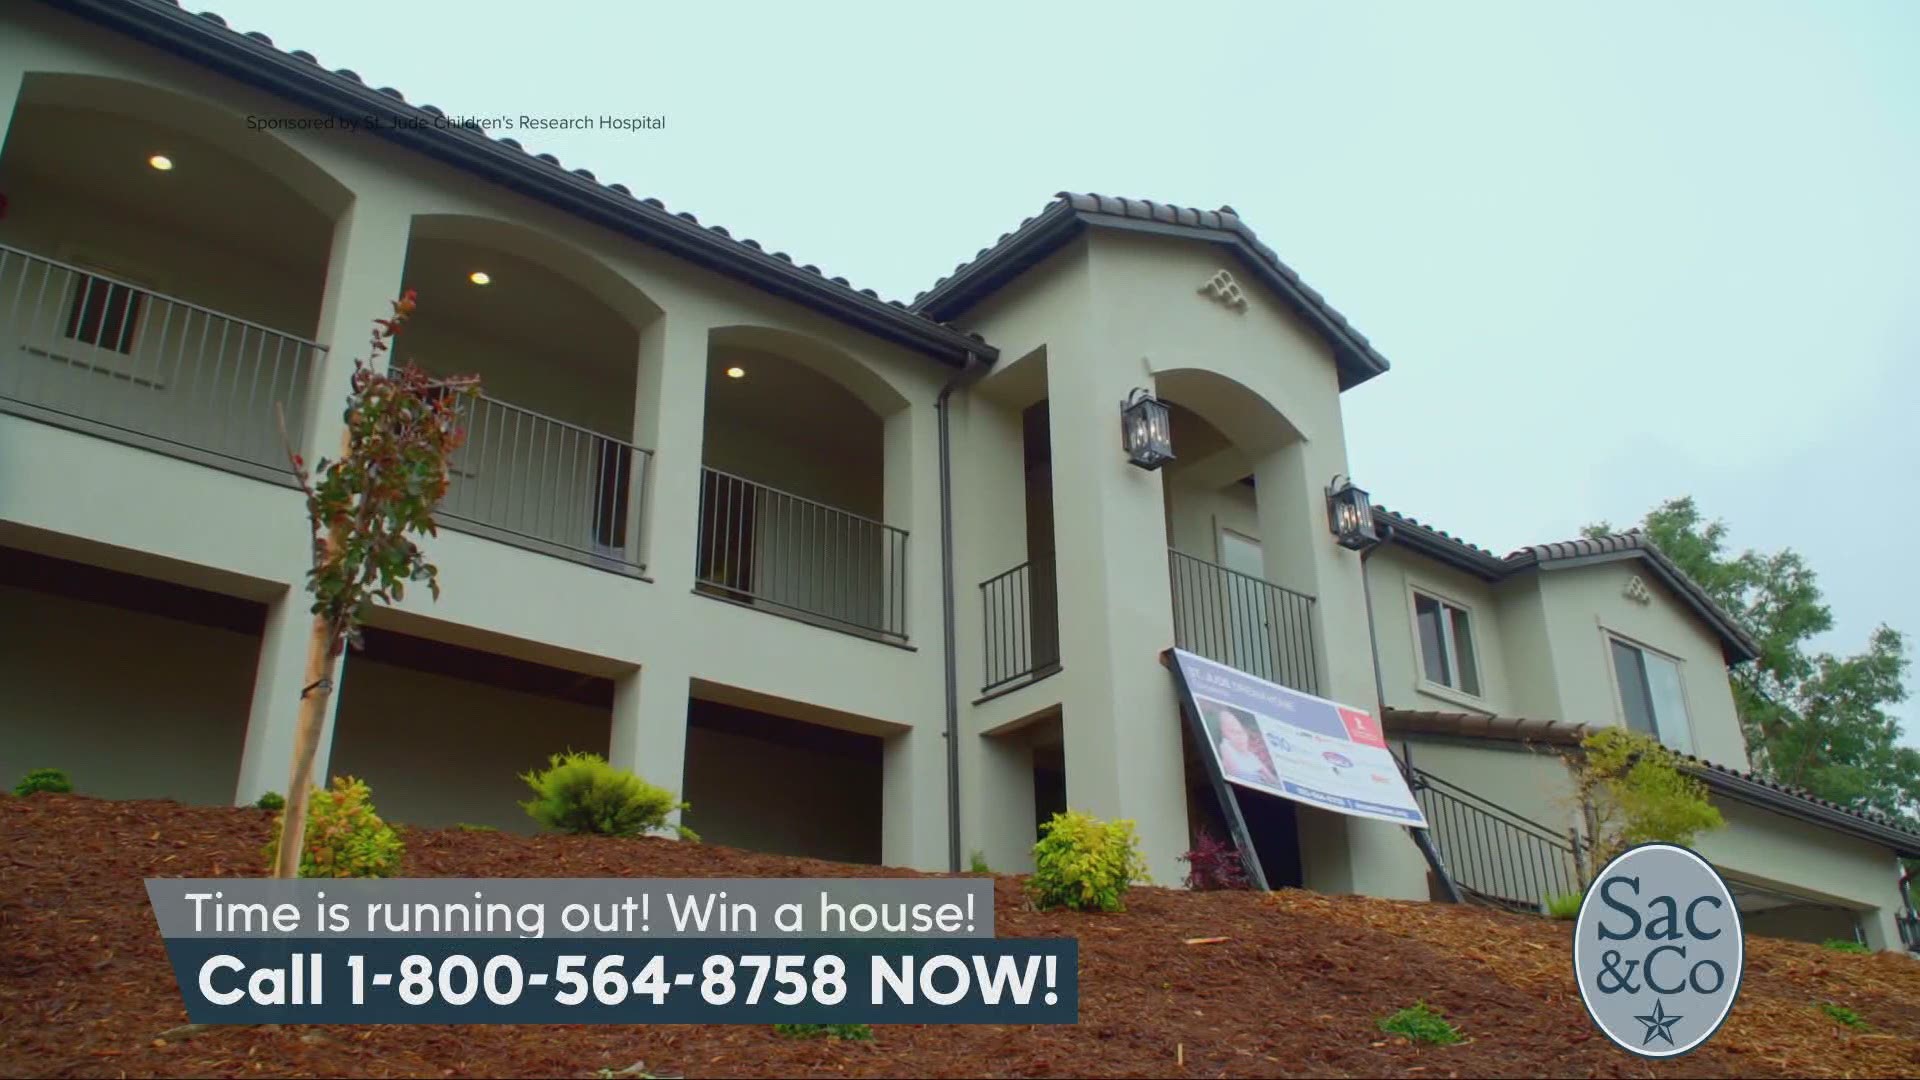 Make sure your name is in the drawing to win this $535,000 house. Not only will you have a chance to win a brand new home, you are joining in the fight against childhood cancer and teaming up with ABC10 and St. Jude Children’s Research Hospital in this fight. The following is a paid segment sponsored by St. Jude Children’s Research Hospital.